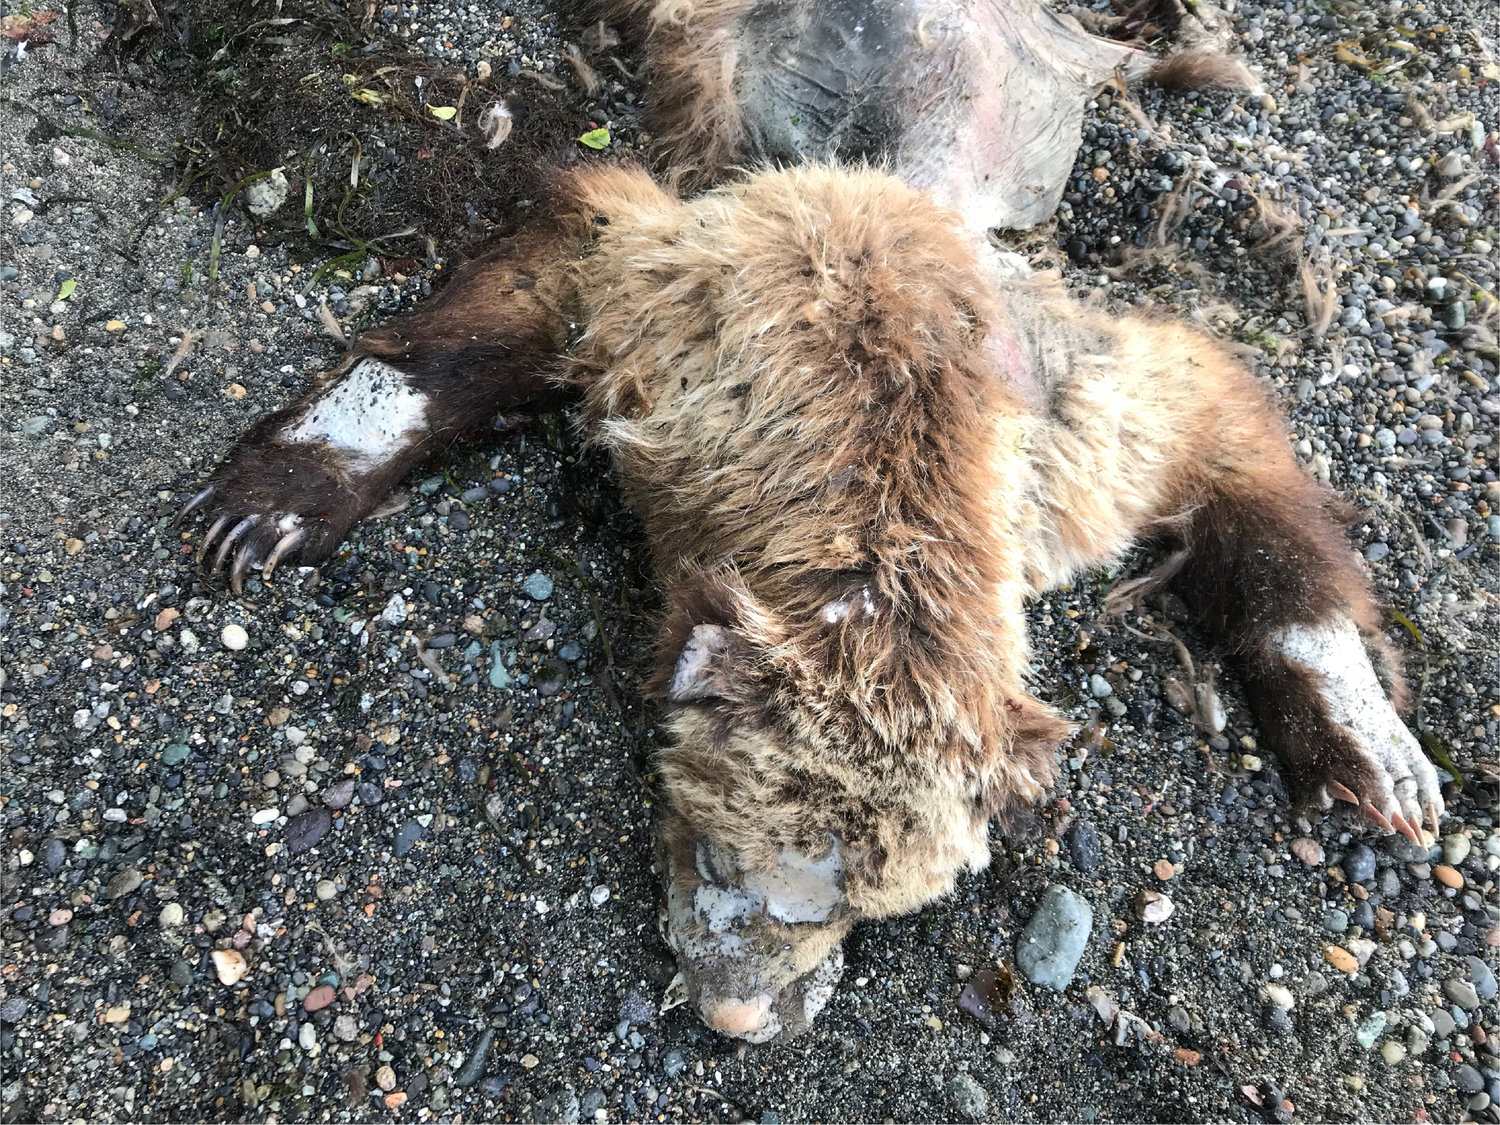 A 250-pound dead grizzly bear found on a beach near Cherry Point June 17 that experts believe came from Canada.